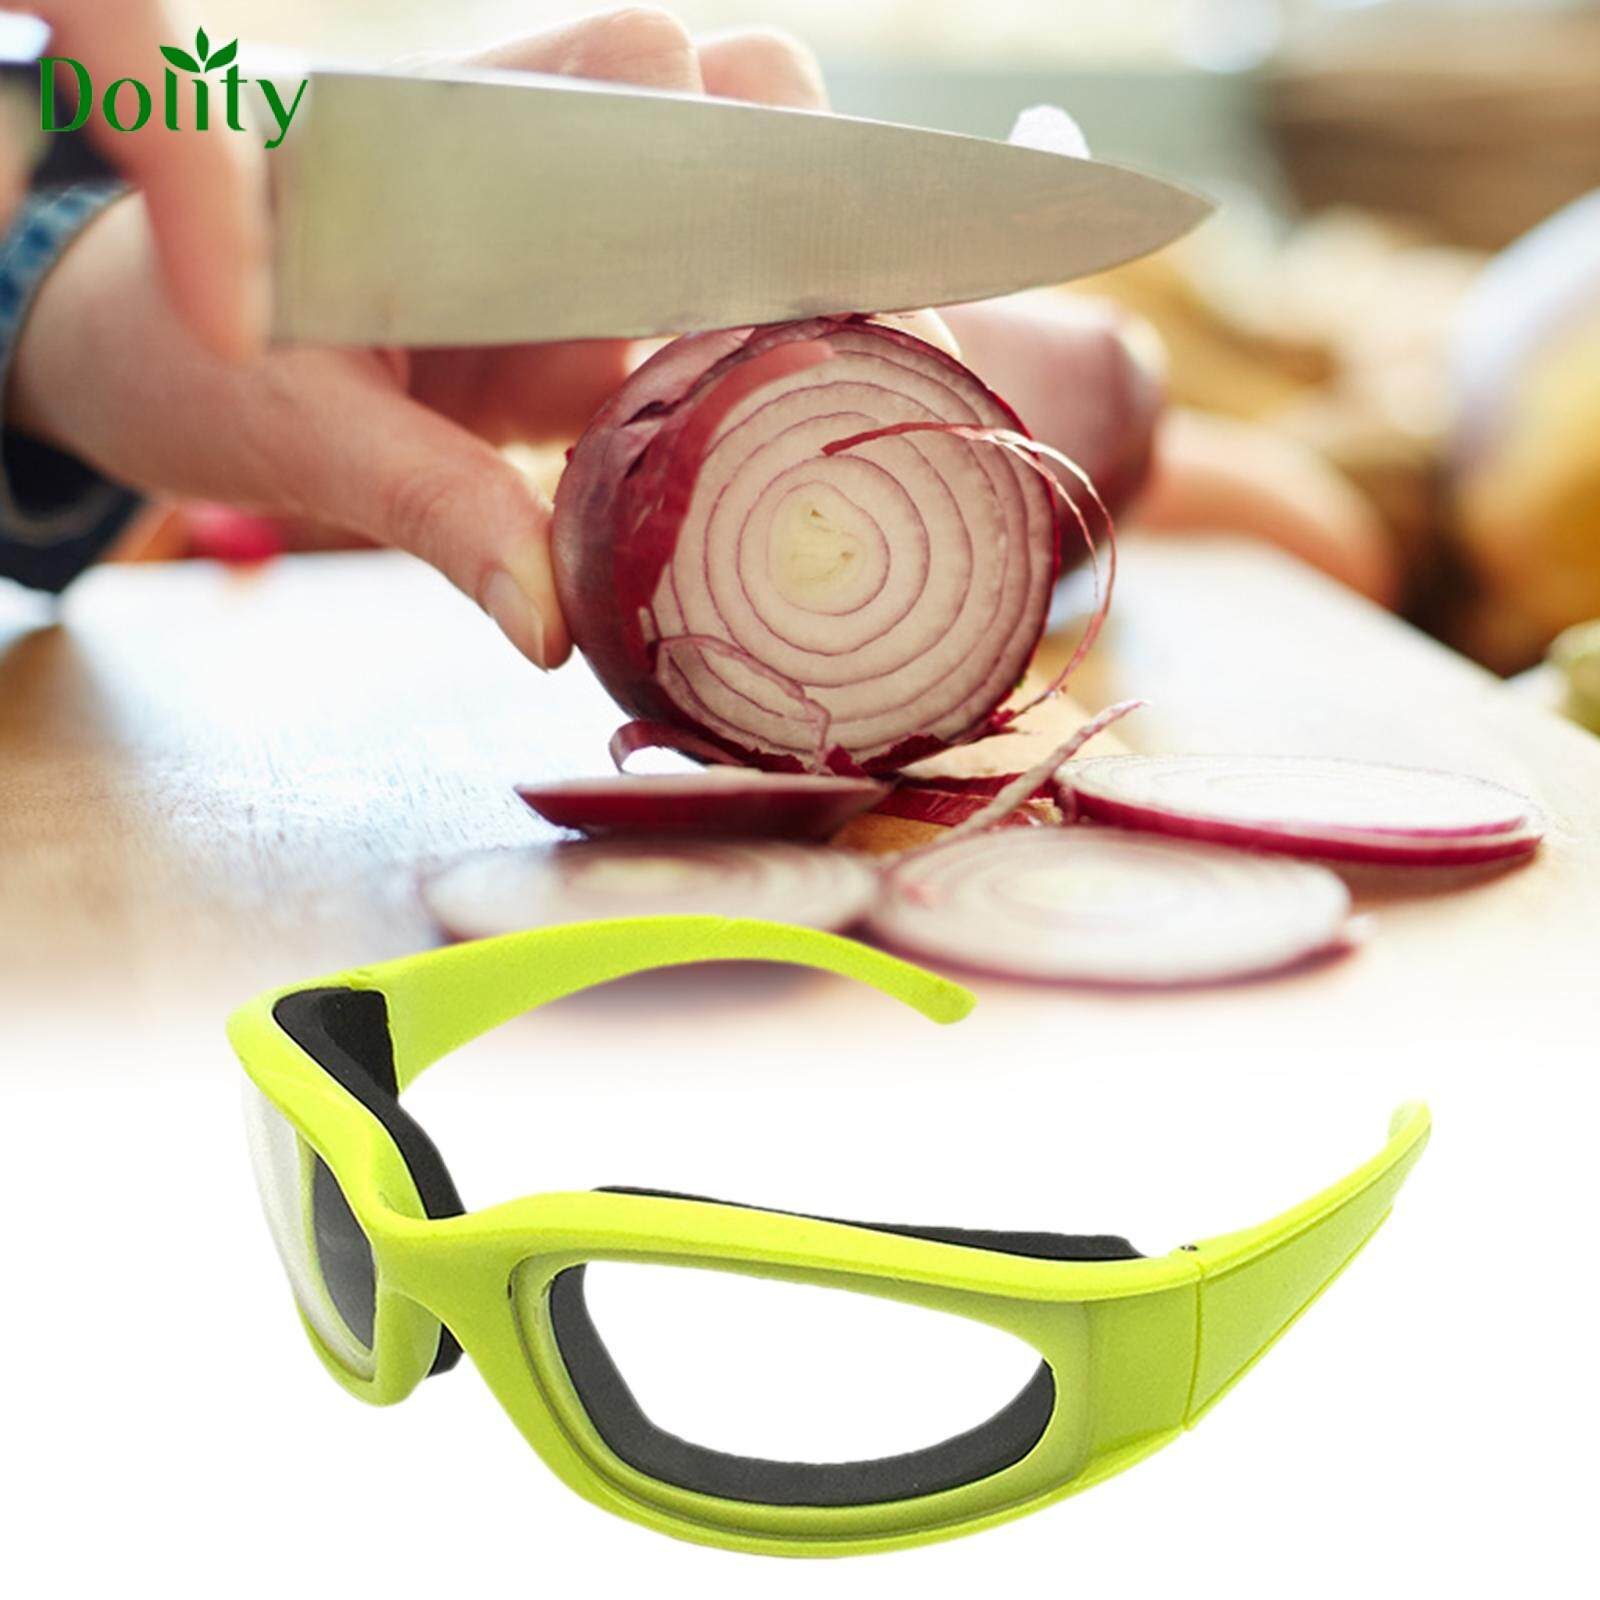 Dolity Unisex Tear Proof Cut Onion Goggles, Saftey Glasses for